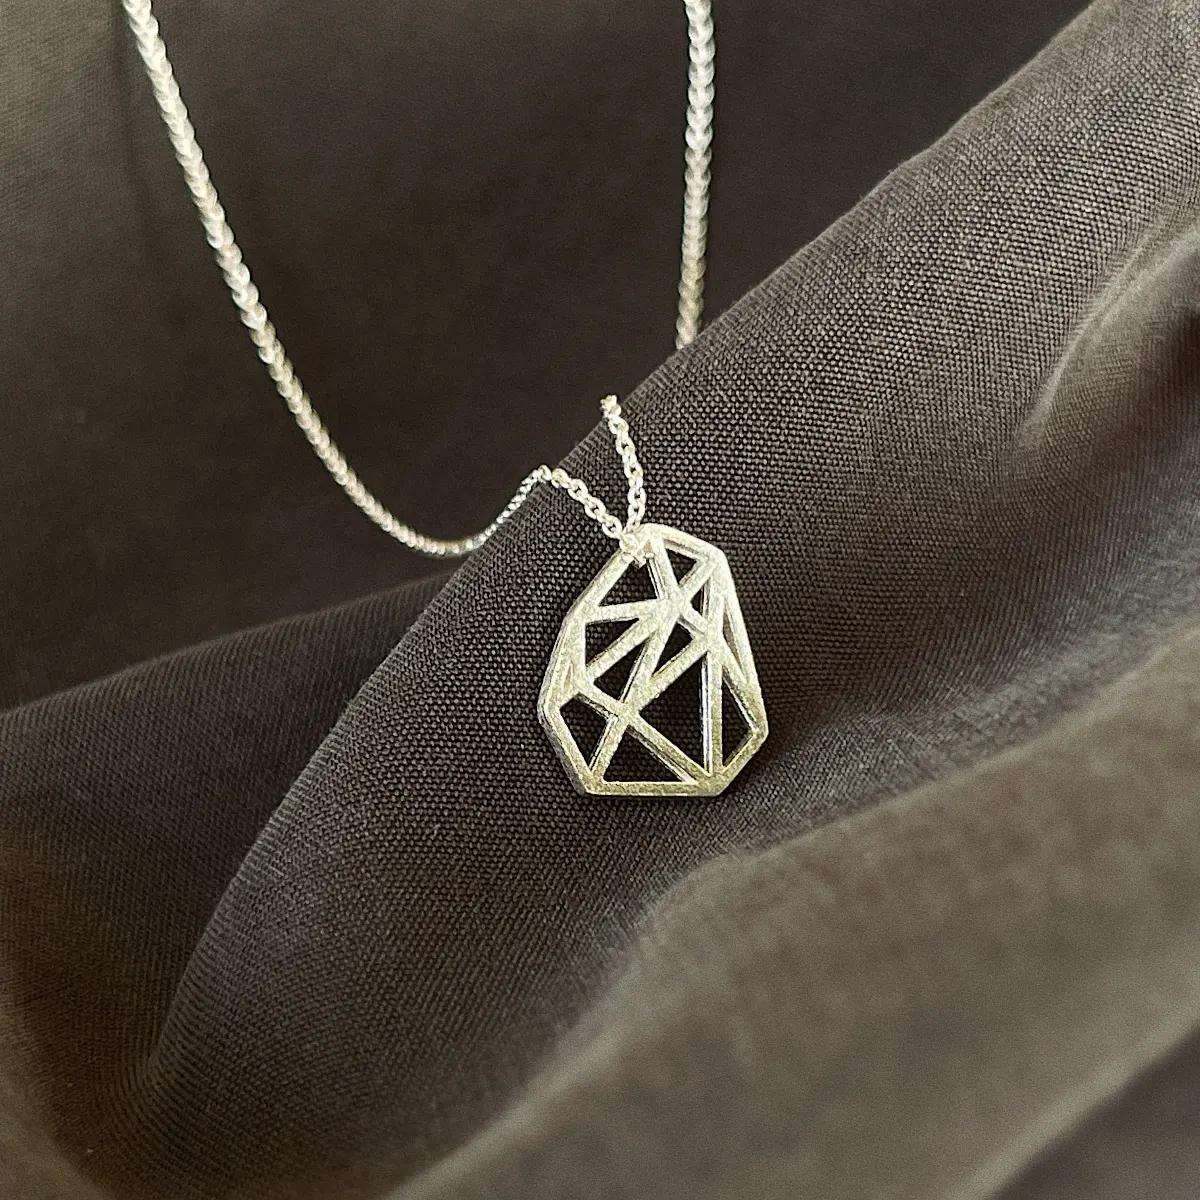 Polygon-shaped pendant from this necklace has a special meaning for us. It resembles a mineral shard, a symbol of Kamena. This necklace would perfect for you if you love subtle accessories.
The necklace is made of 925 sterling silver. 
The length of